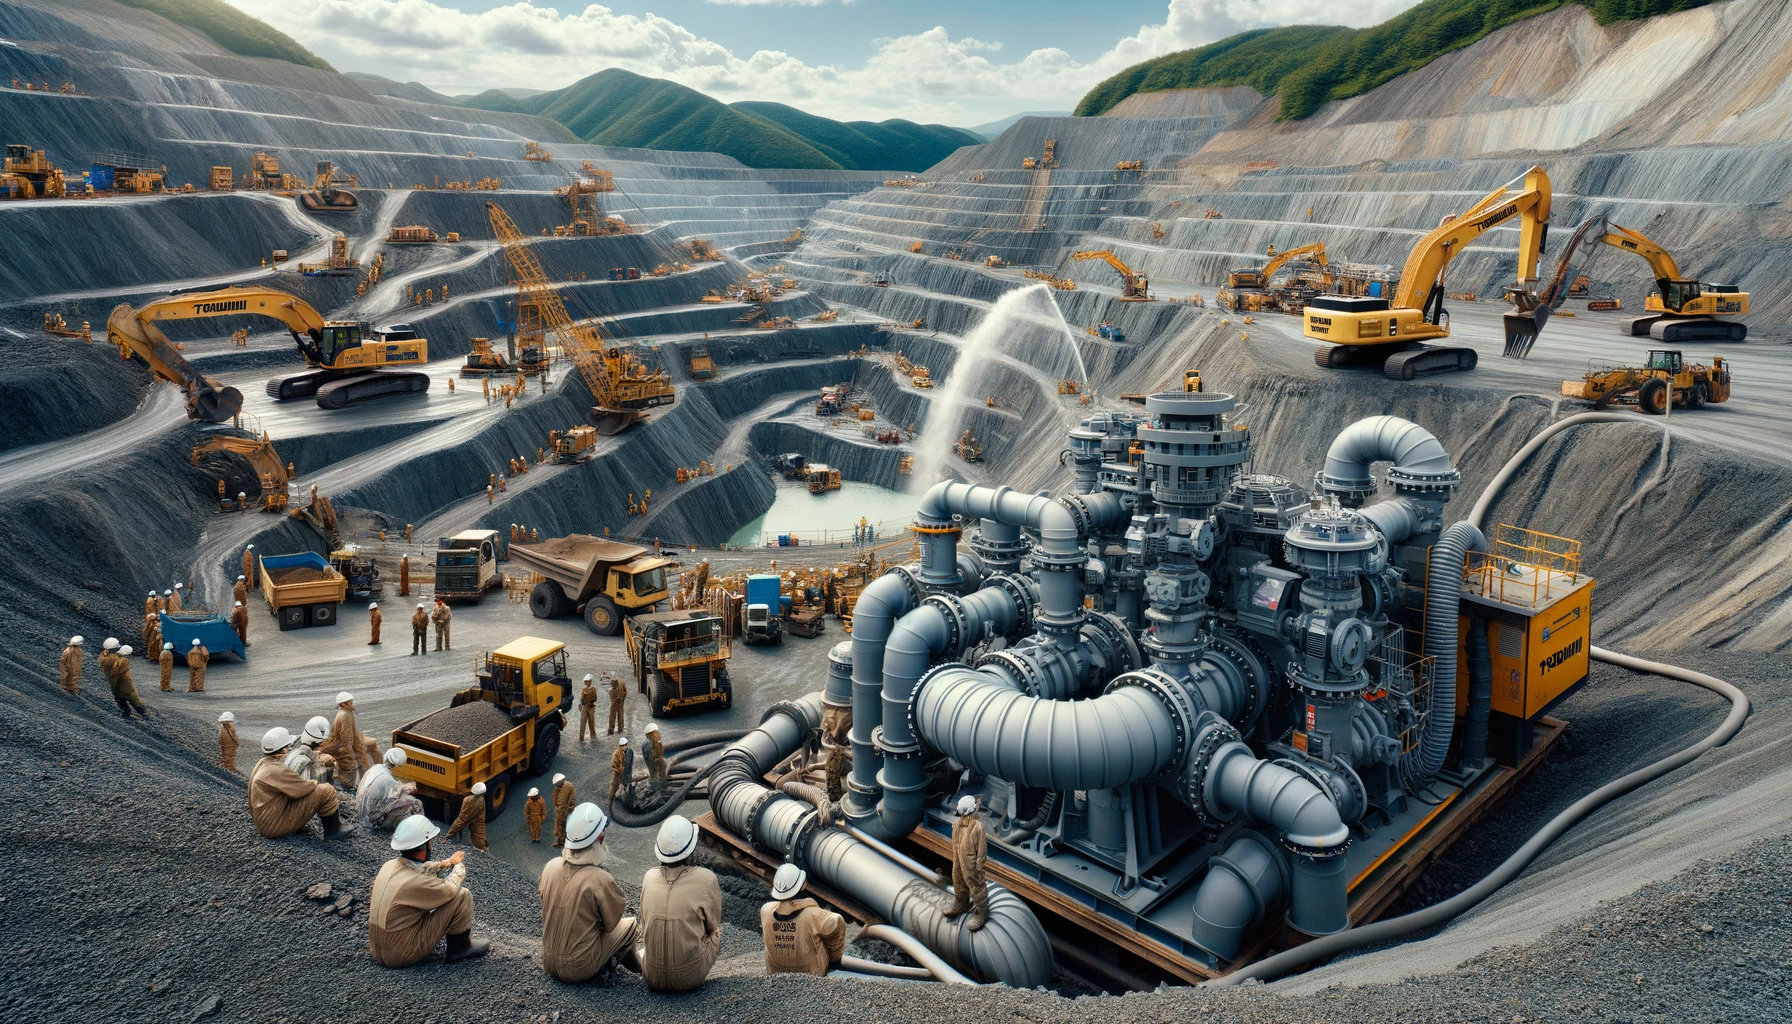 Tsurumi pumps in operation at a busy open-pit mining site with workers and large machinery.